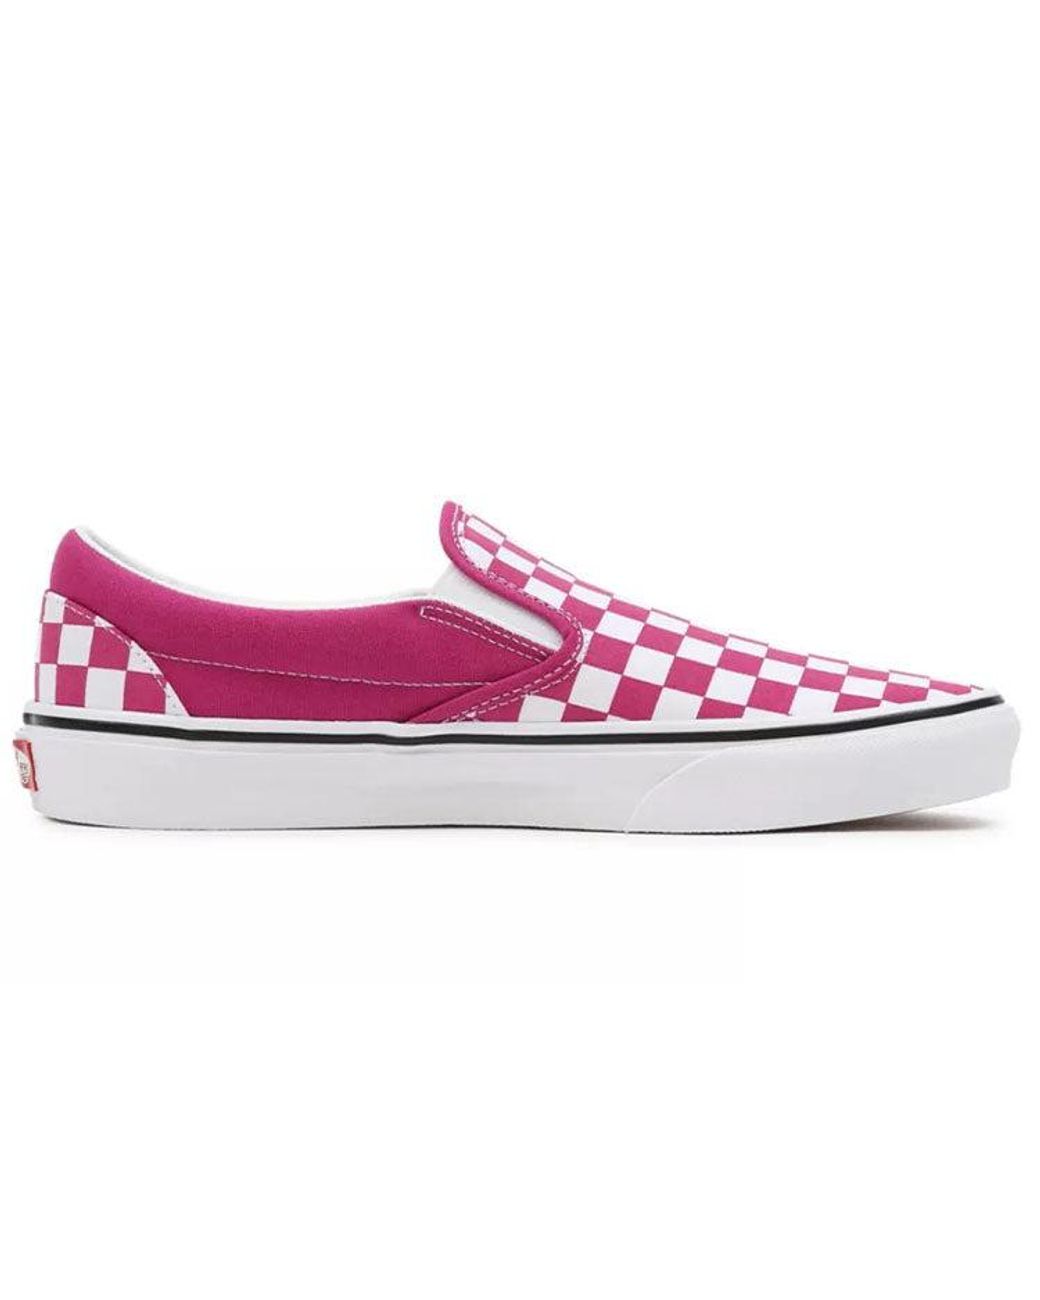 Vans Checkerboard Classic Slip-on Shoes Fuchsia in Pink | Lyst